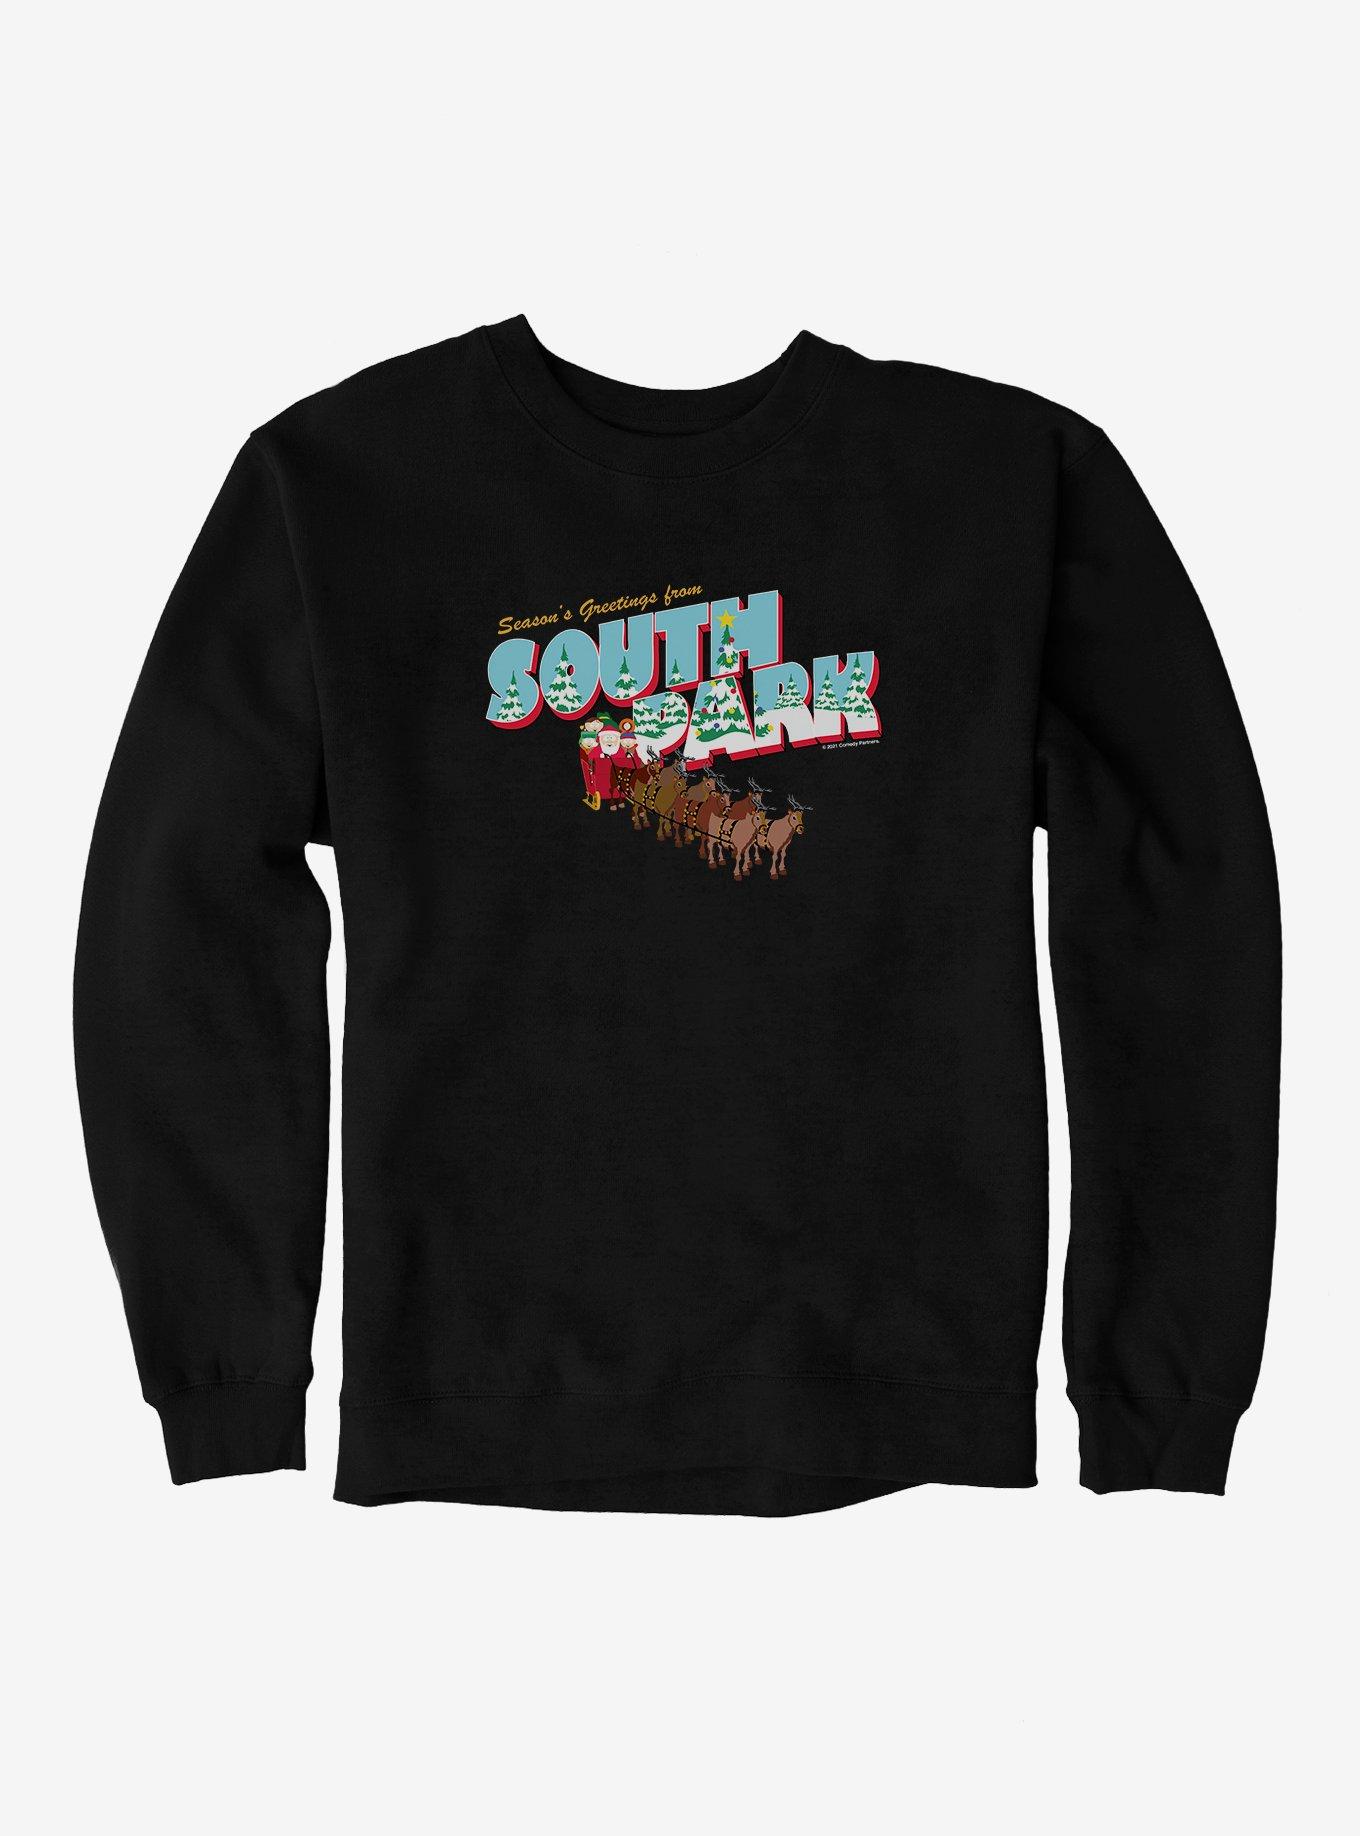 South Park Christmas Guide On the Roof Sweatshirt